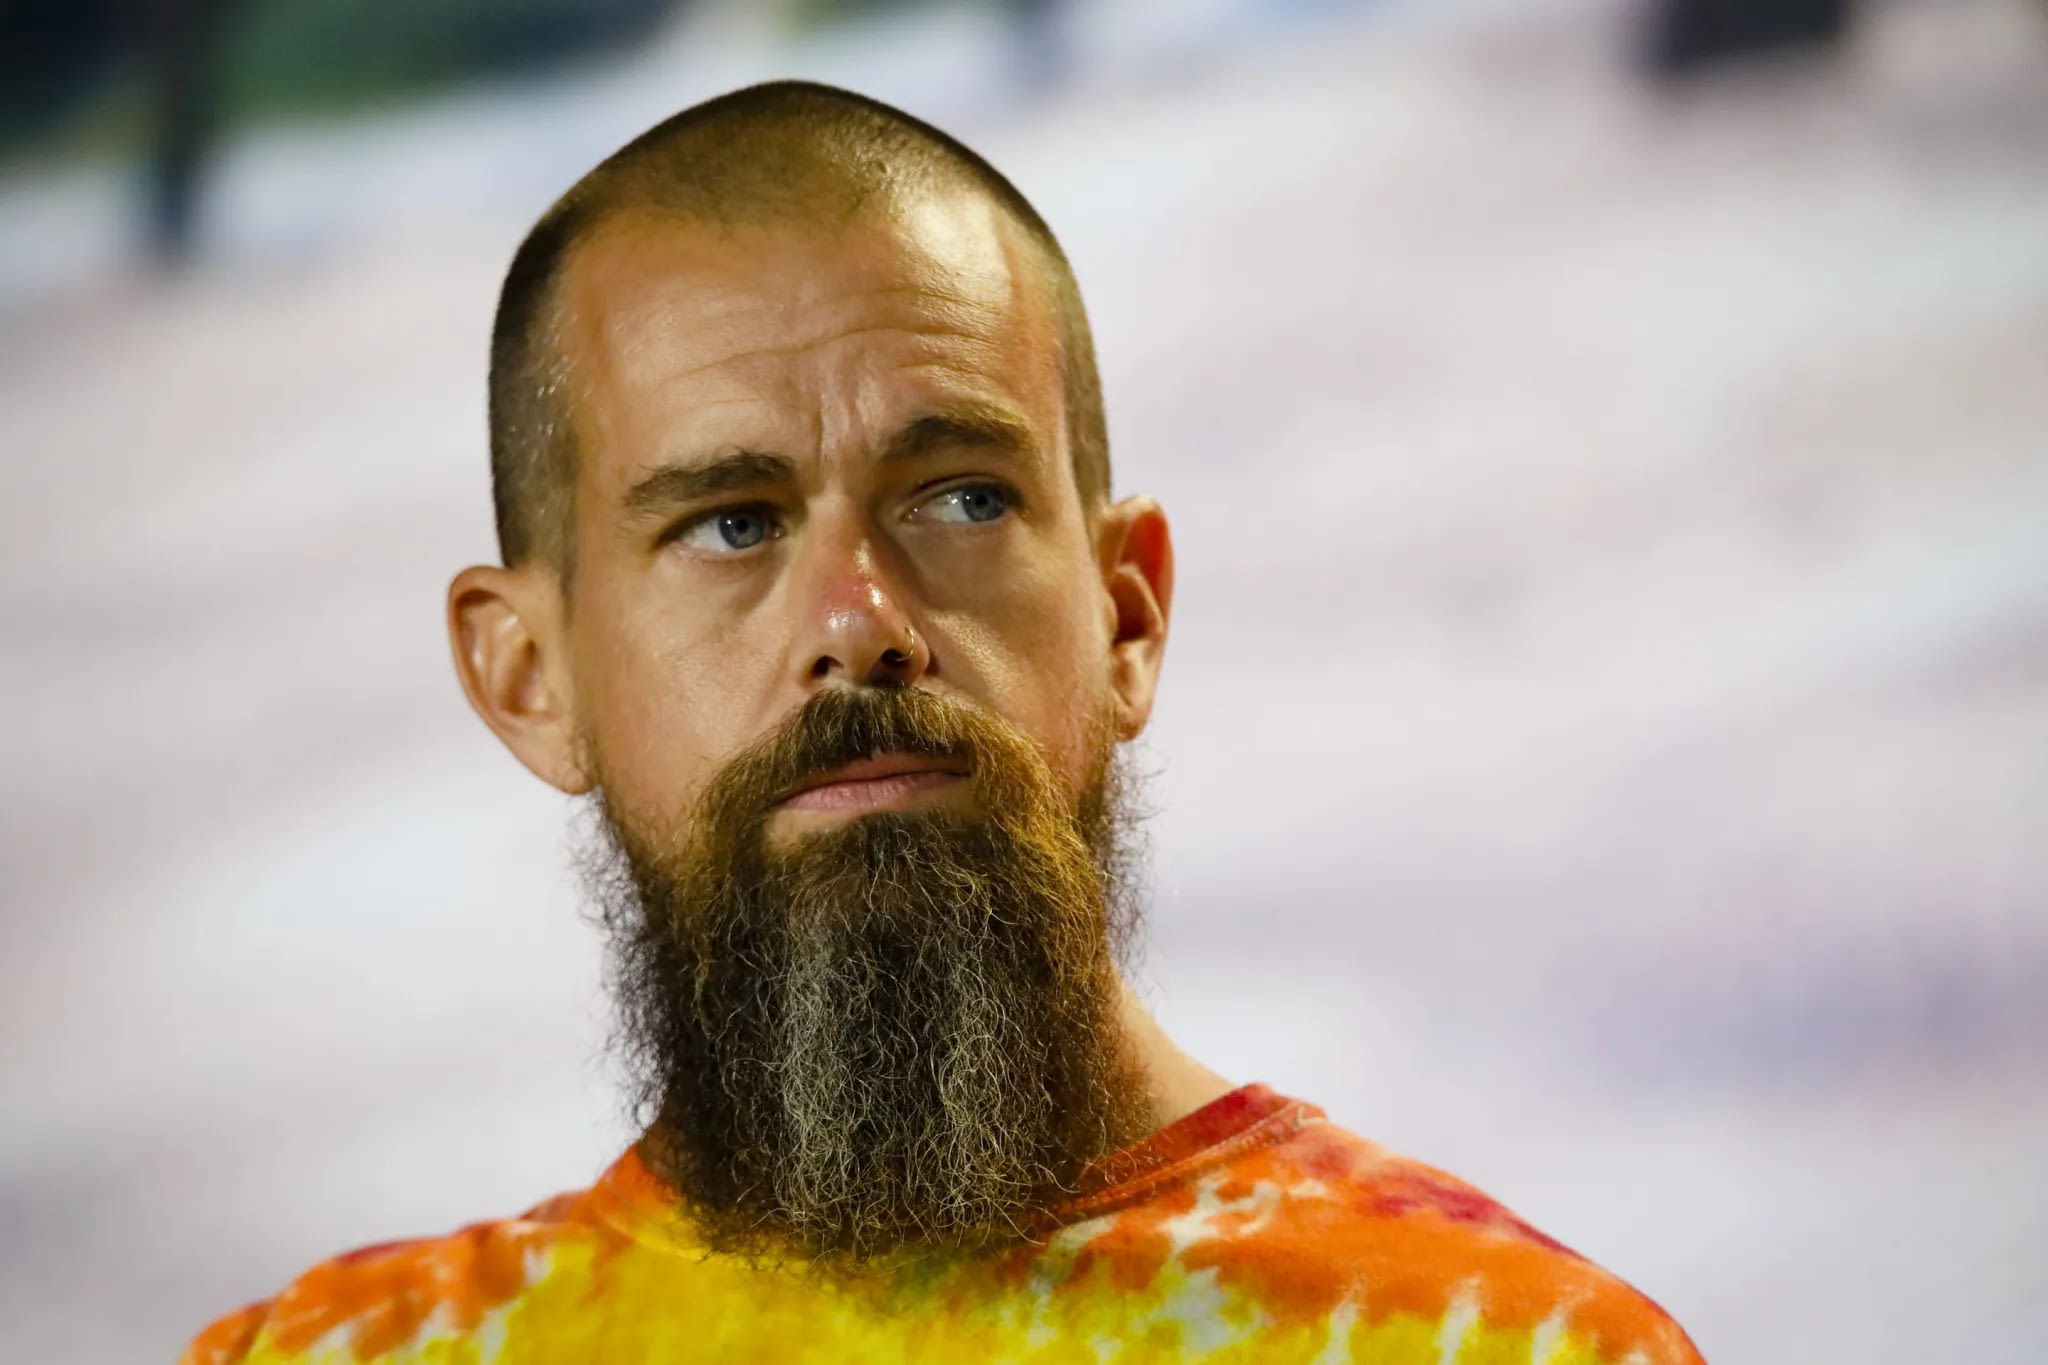 Twitter founder Jack Dorsey warns social media algorithms are draining people of their free will—and Elon Musk agrees with him